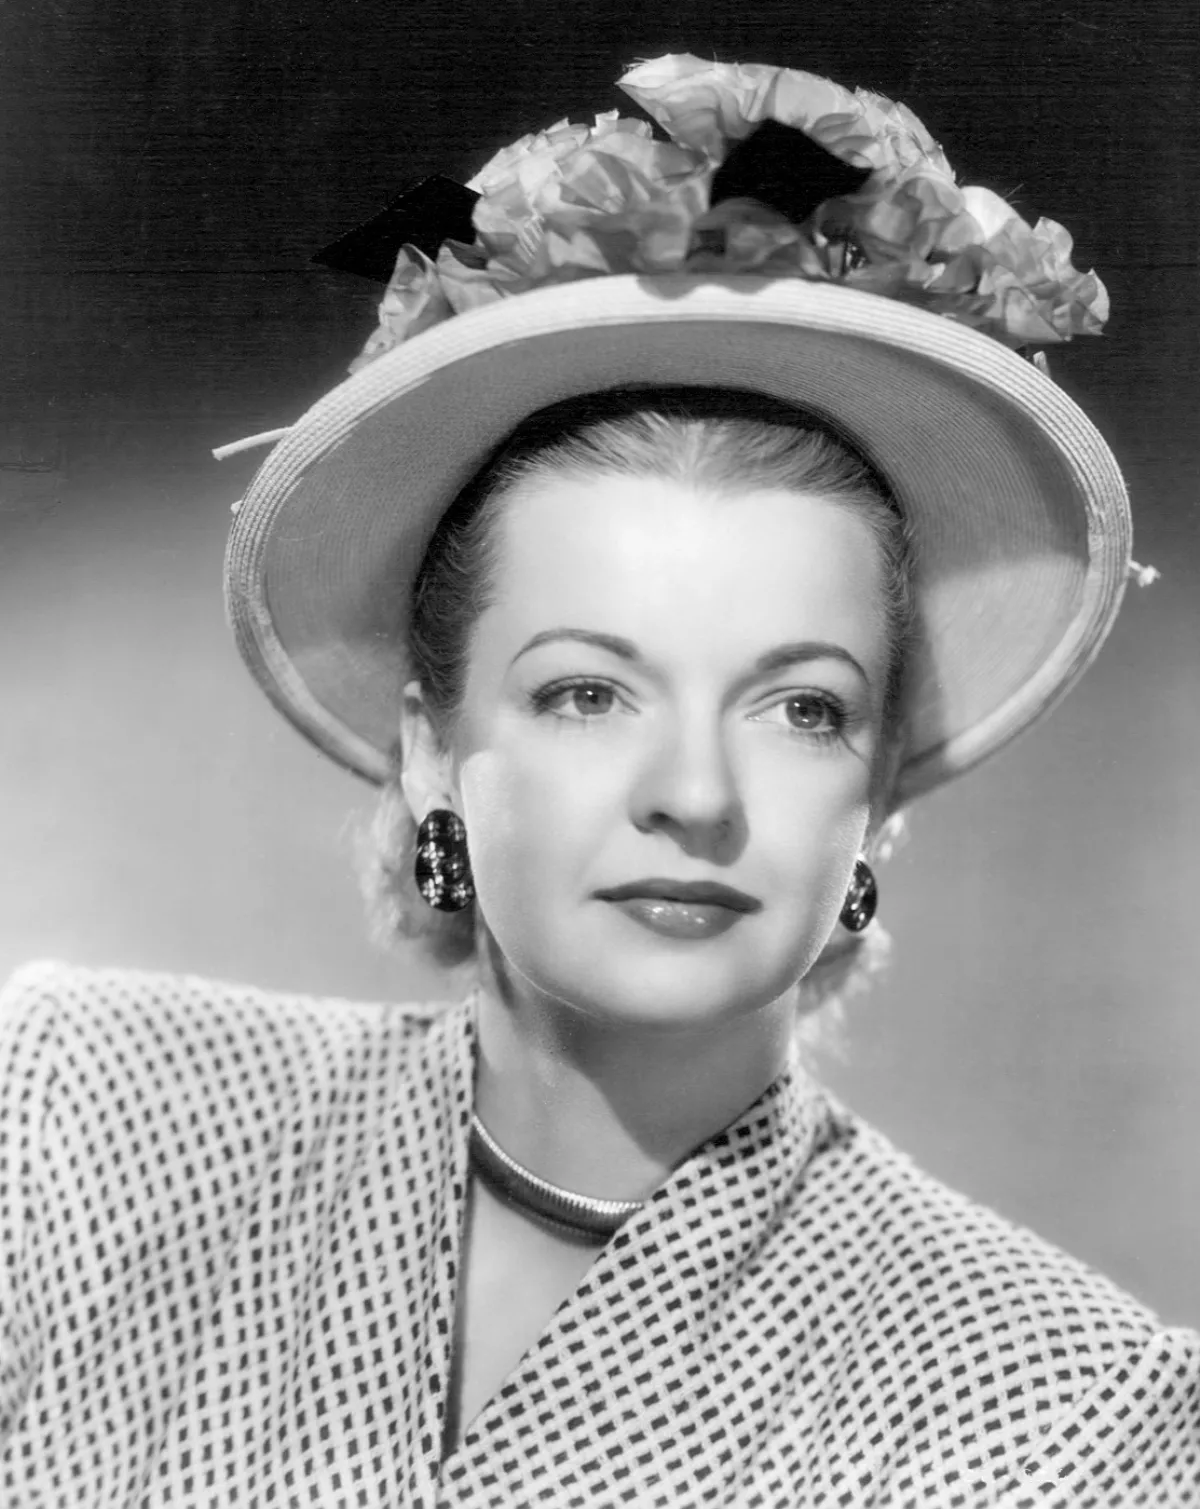 12 Facts About Dale Evans | FactSnippet